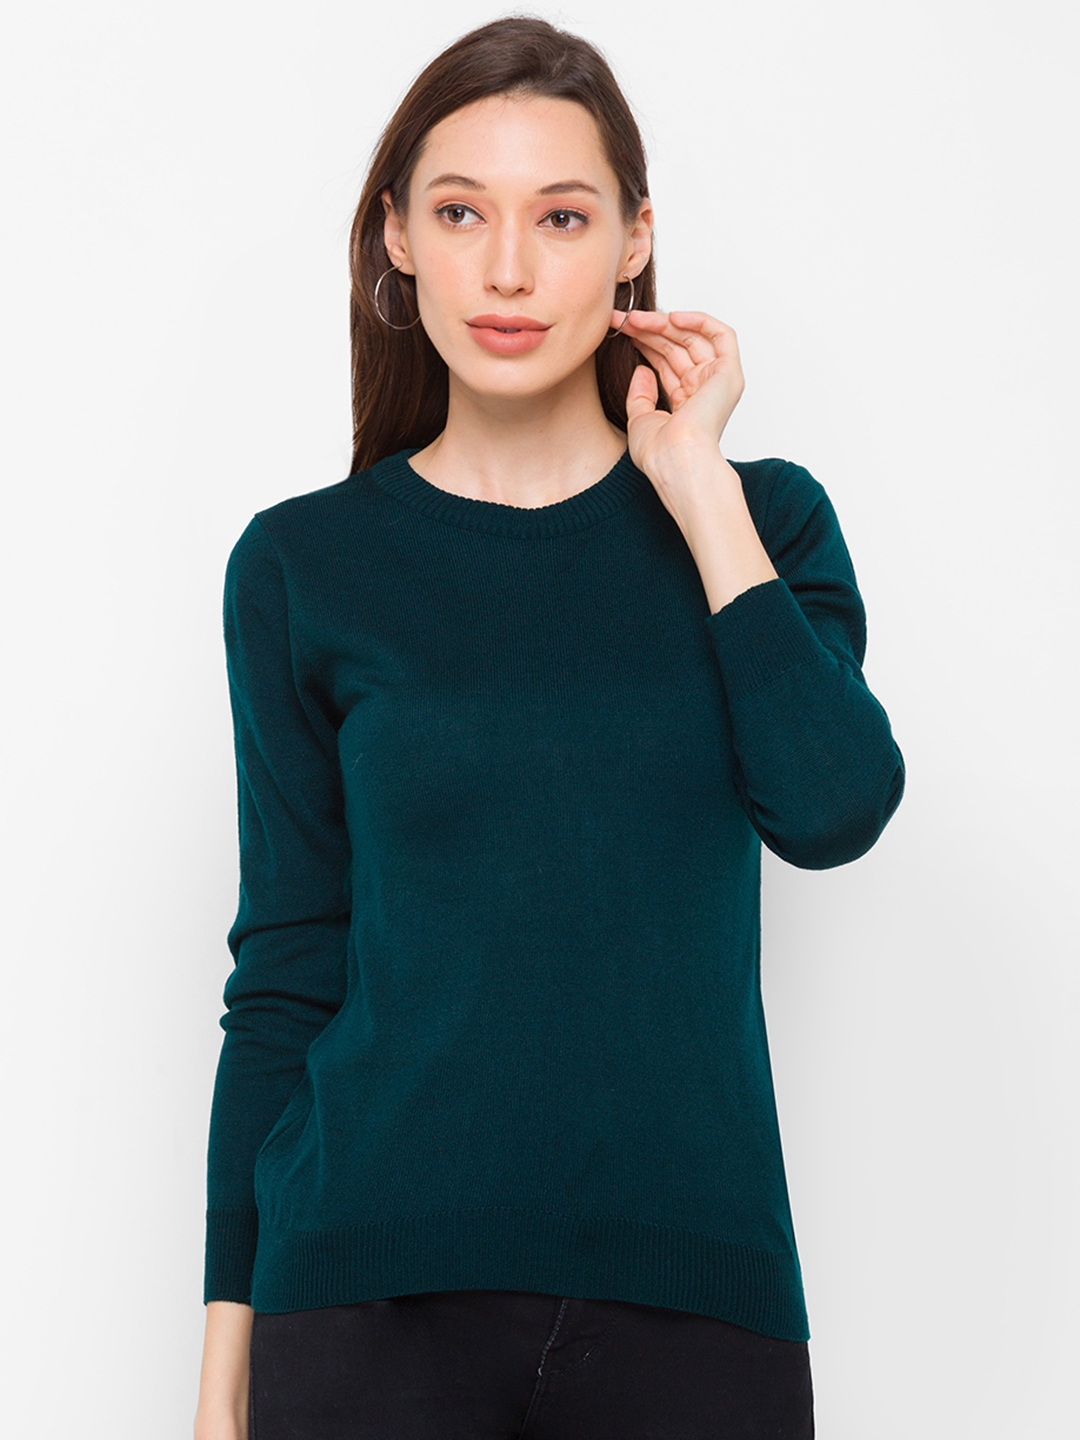 globus | Green Solid Sweater 0